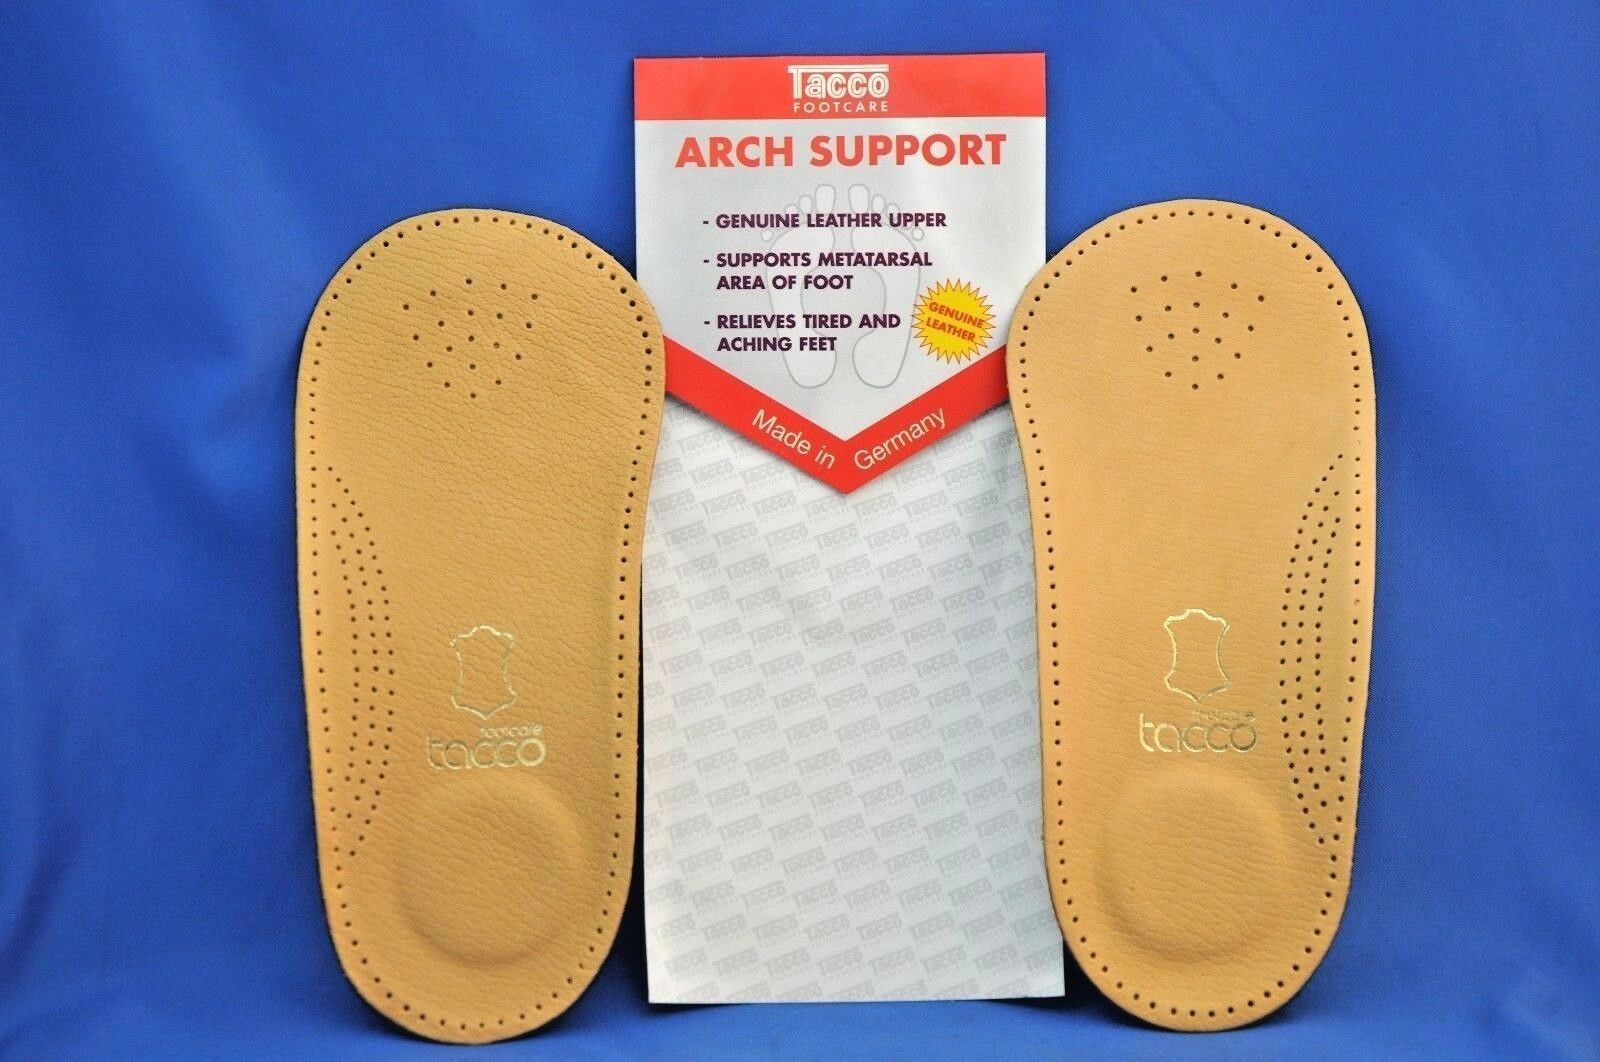 Tacco 650 3/4 Length Orthotic Insert Arch Support- All Sizes!